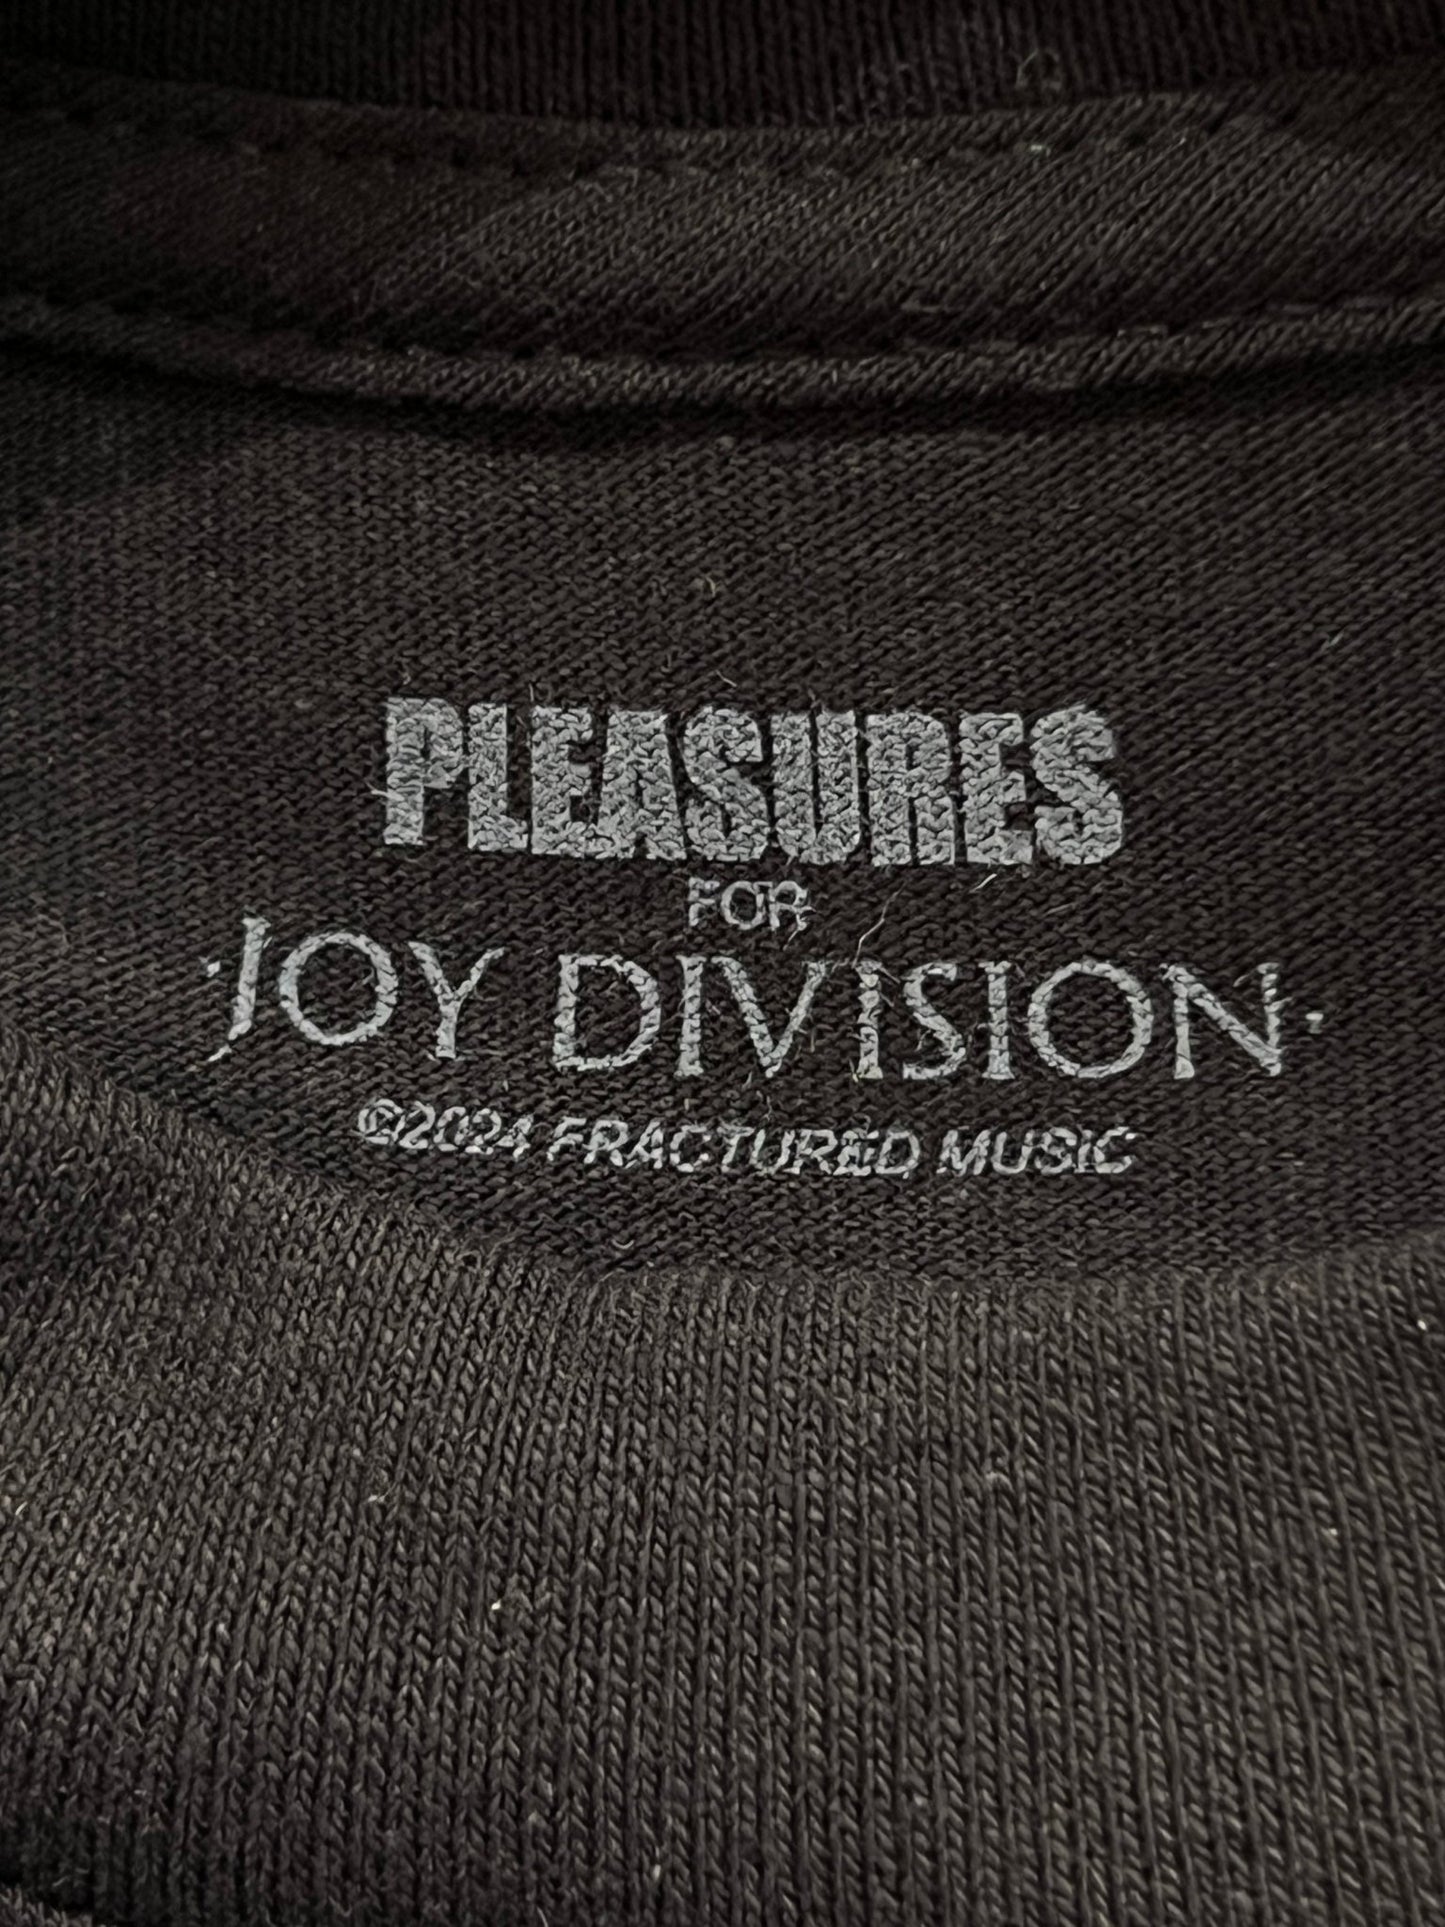 Black cotton fabric with PLEASURES BROKEN IN T-SHIRT BLK screen printed in white text, an official collaboration with PLEASURES.